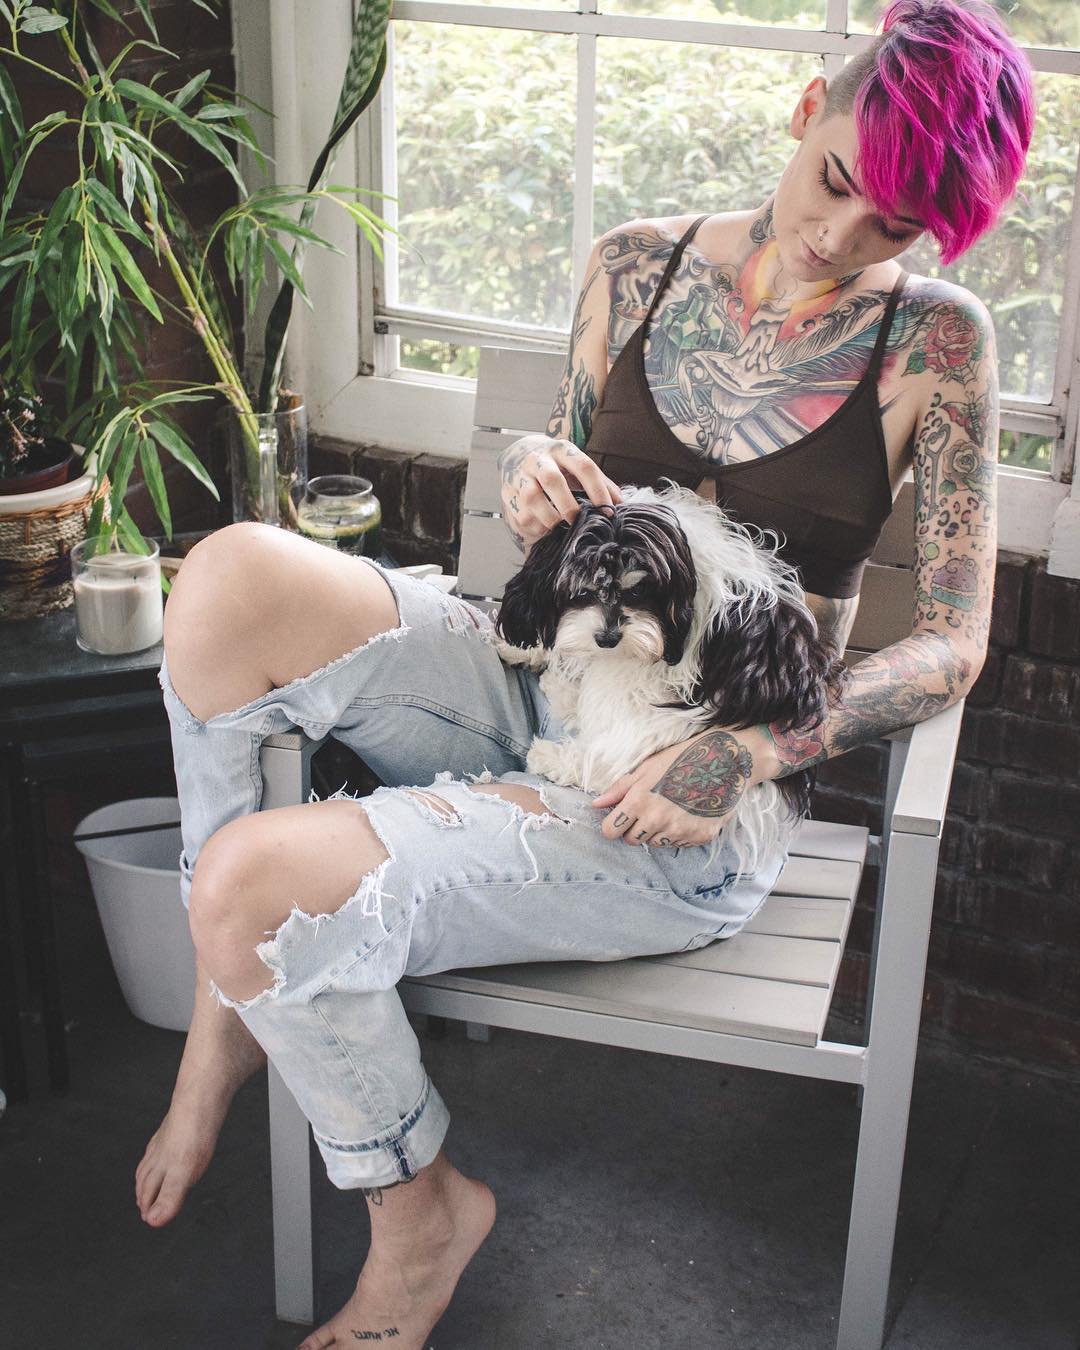 Wearing bralette sitting in a chair with a dog